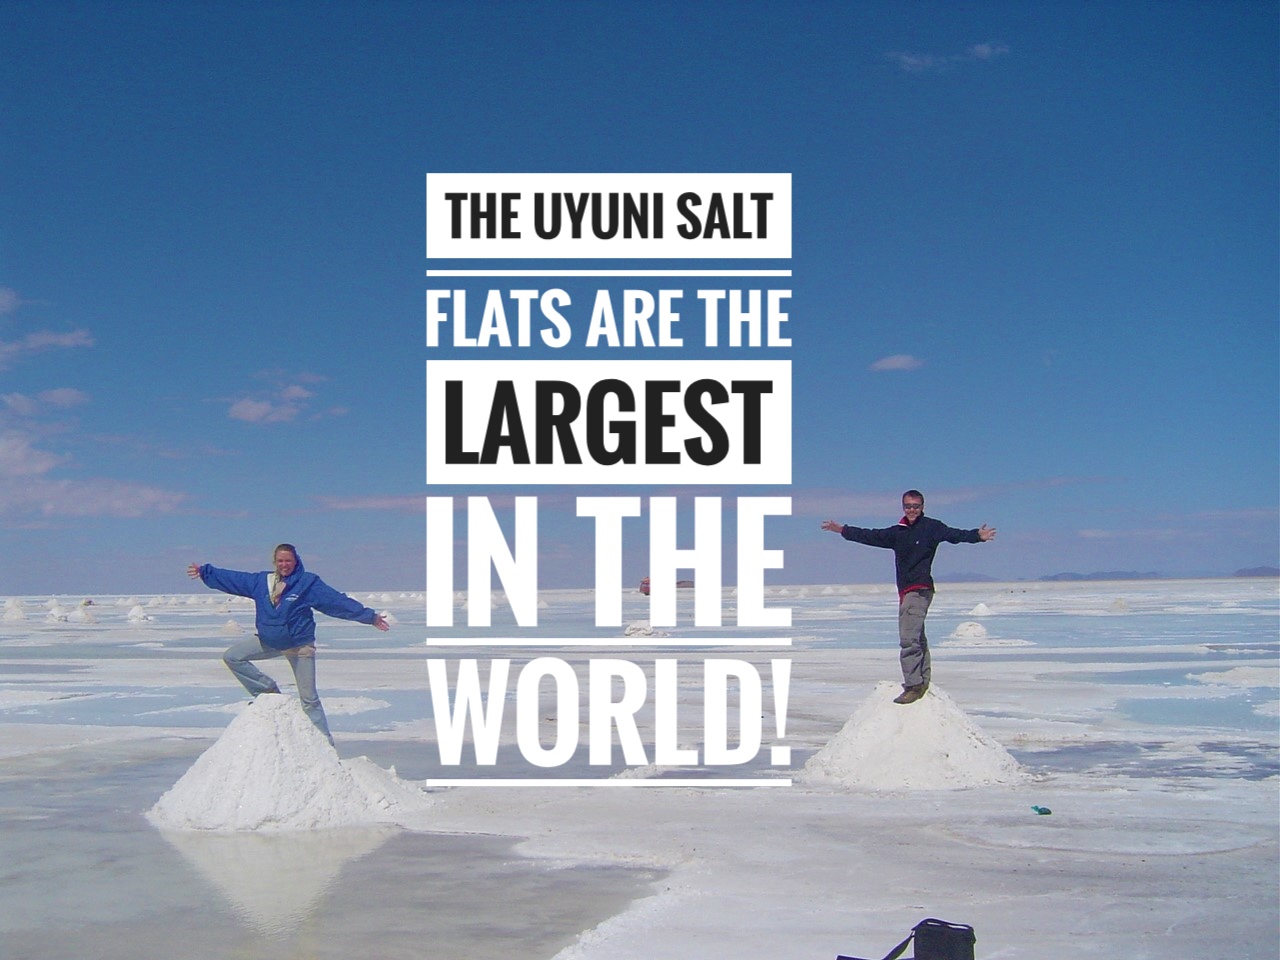 The Uyuni Salt Flats are one of the most incredible vistas on Earth that should not be missed! Bolivia’s Salar De Uyuni is a beautiful natural wonder and is a must on anyone’s travel list so plan your trip with these tips!